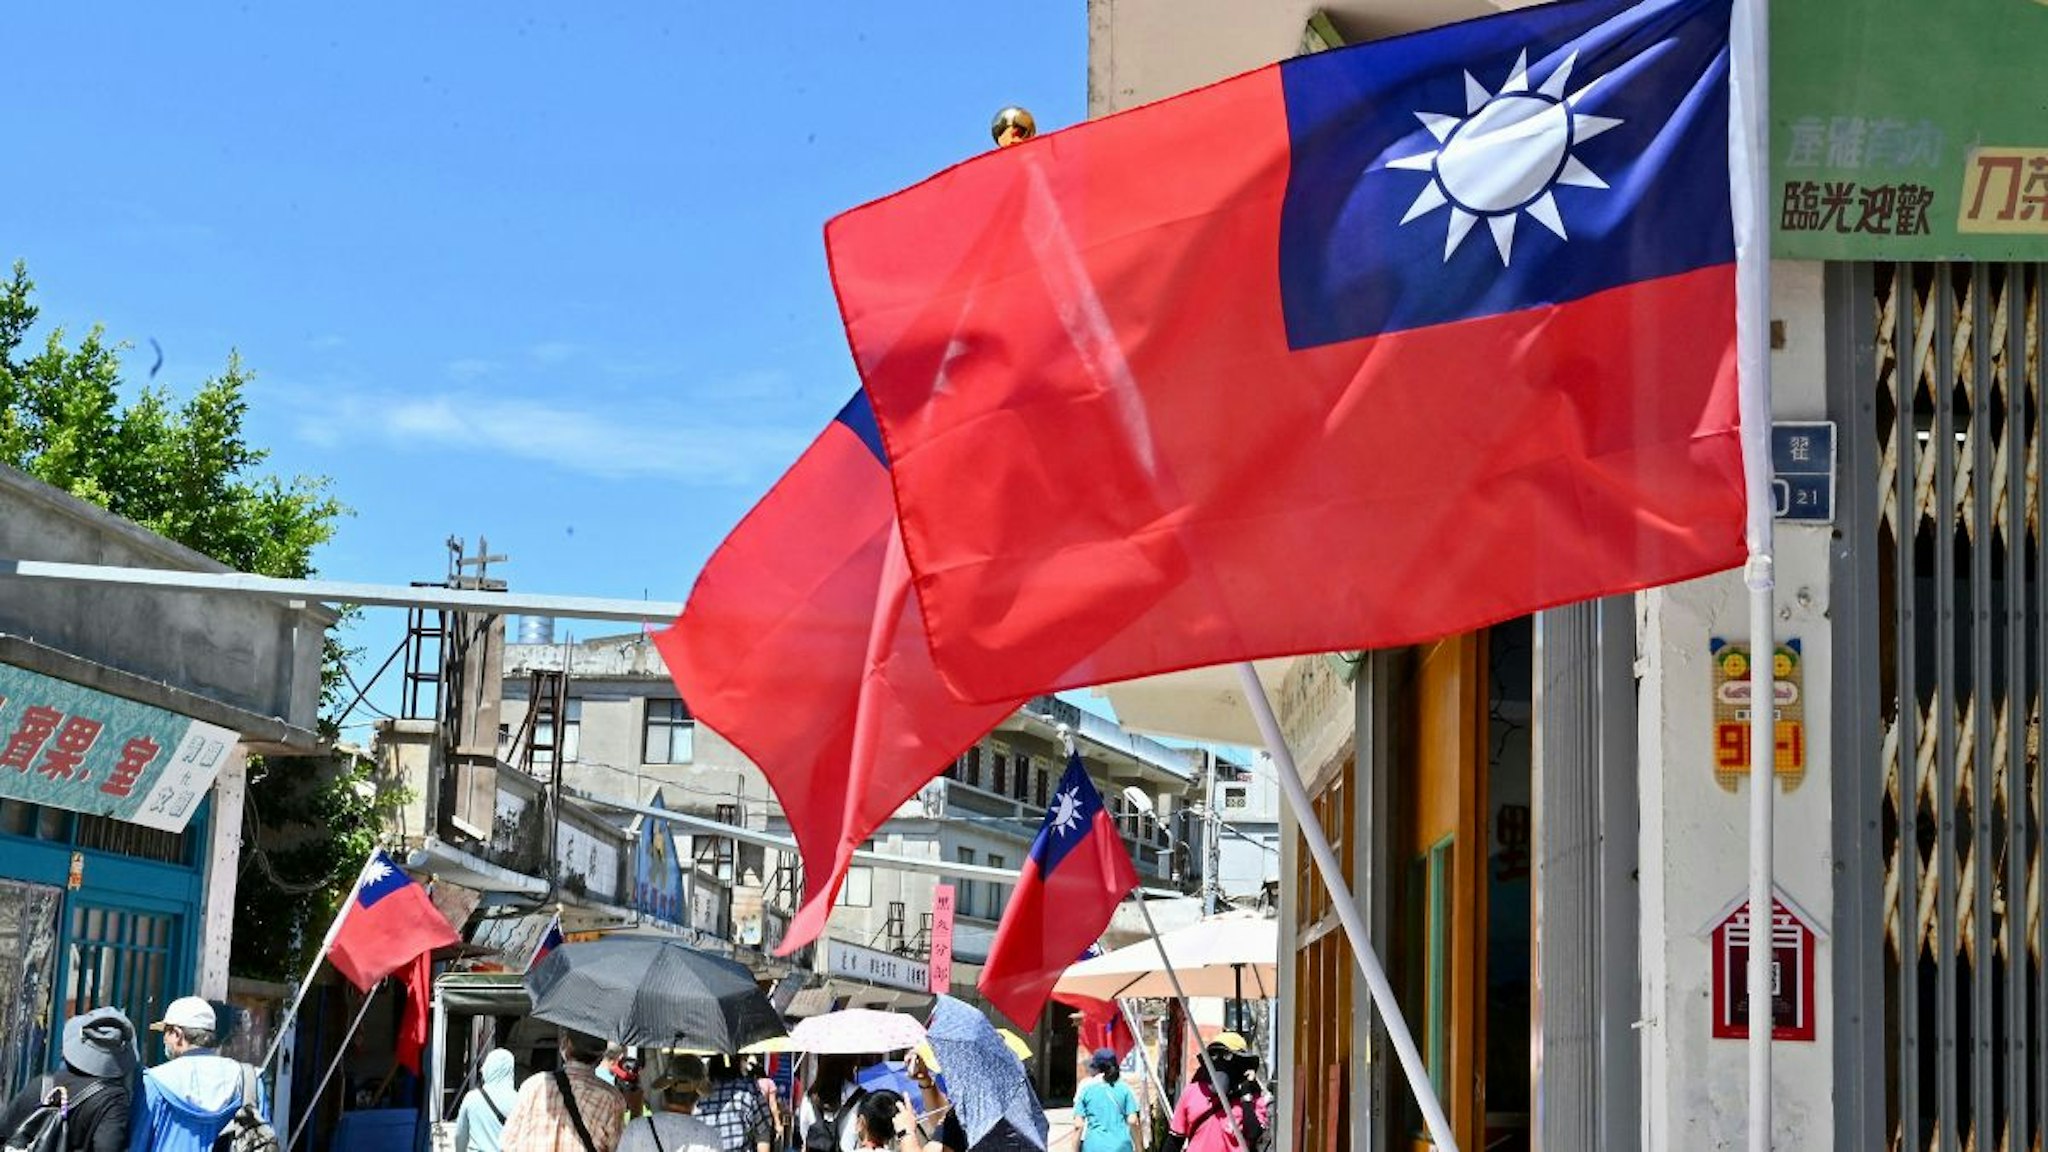 Taiwanese flags are seen as tourists walk past in Taiwan's Kinmen islands on August 11, 2022.